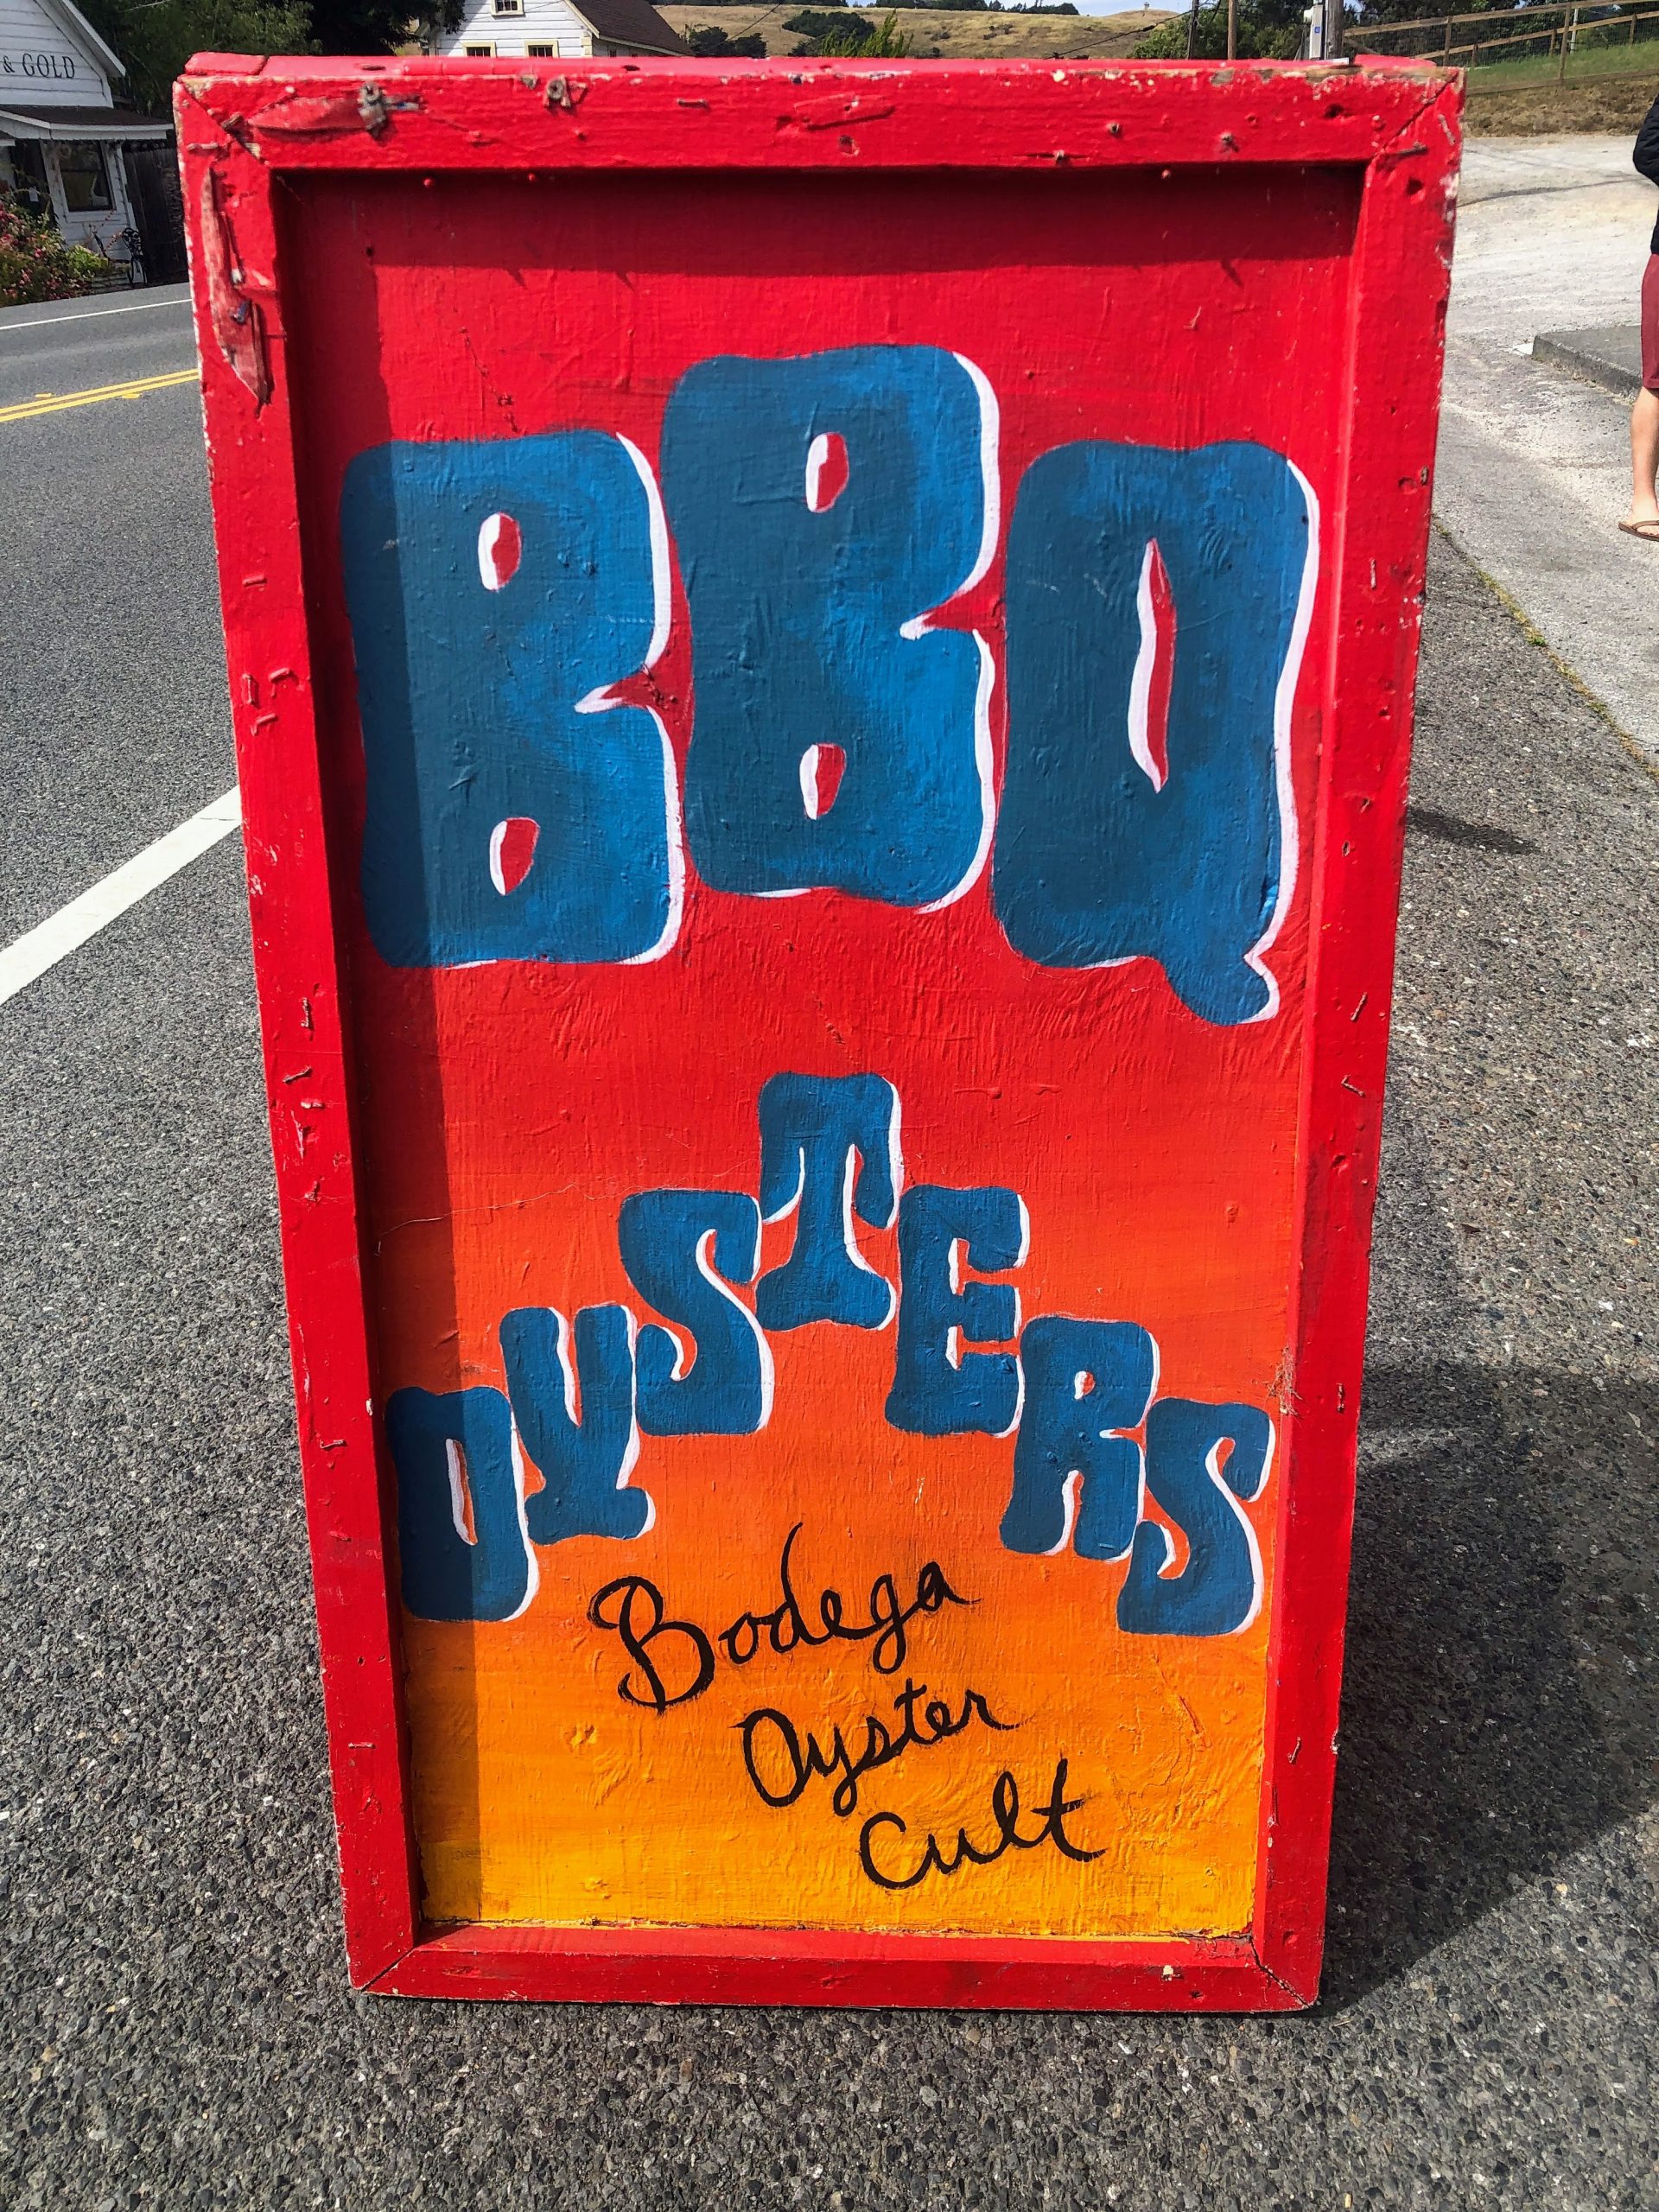 A bright red and orange sign reads BBQ Oysters Bodega Oyster Cult on blue and black letters.